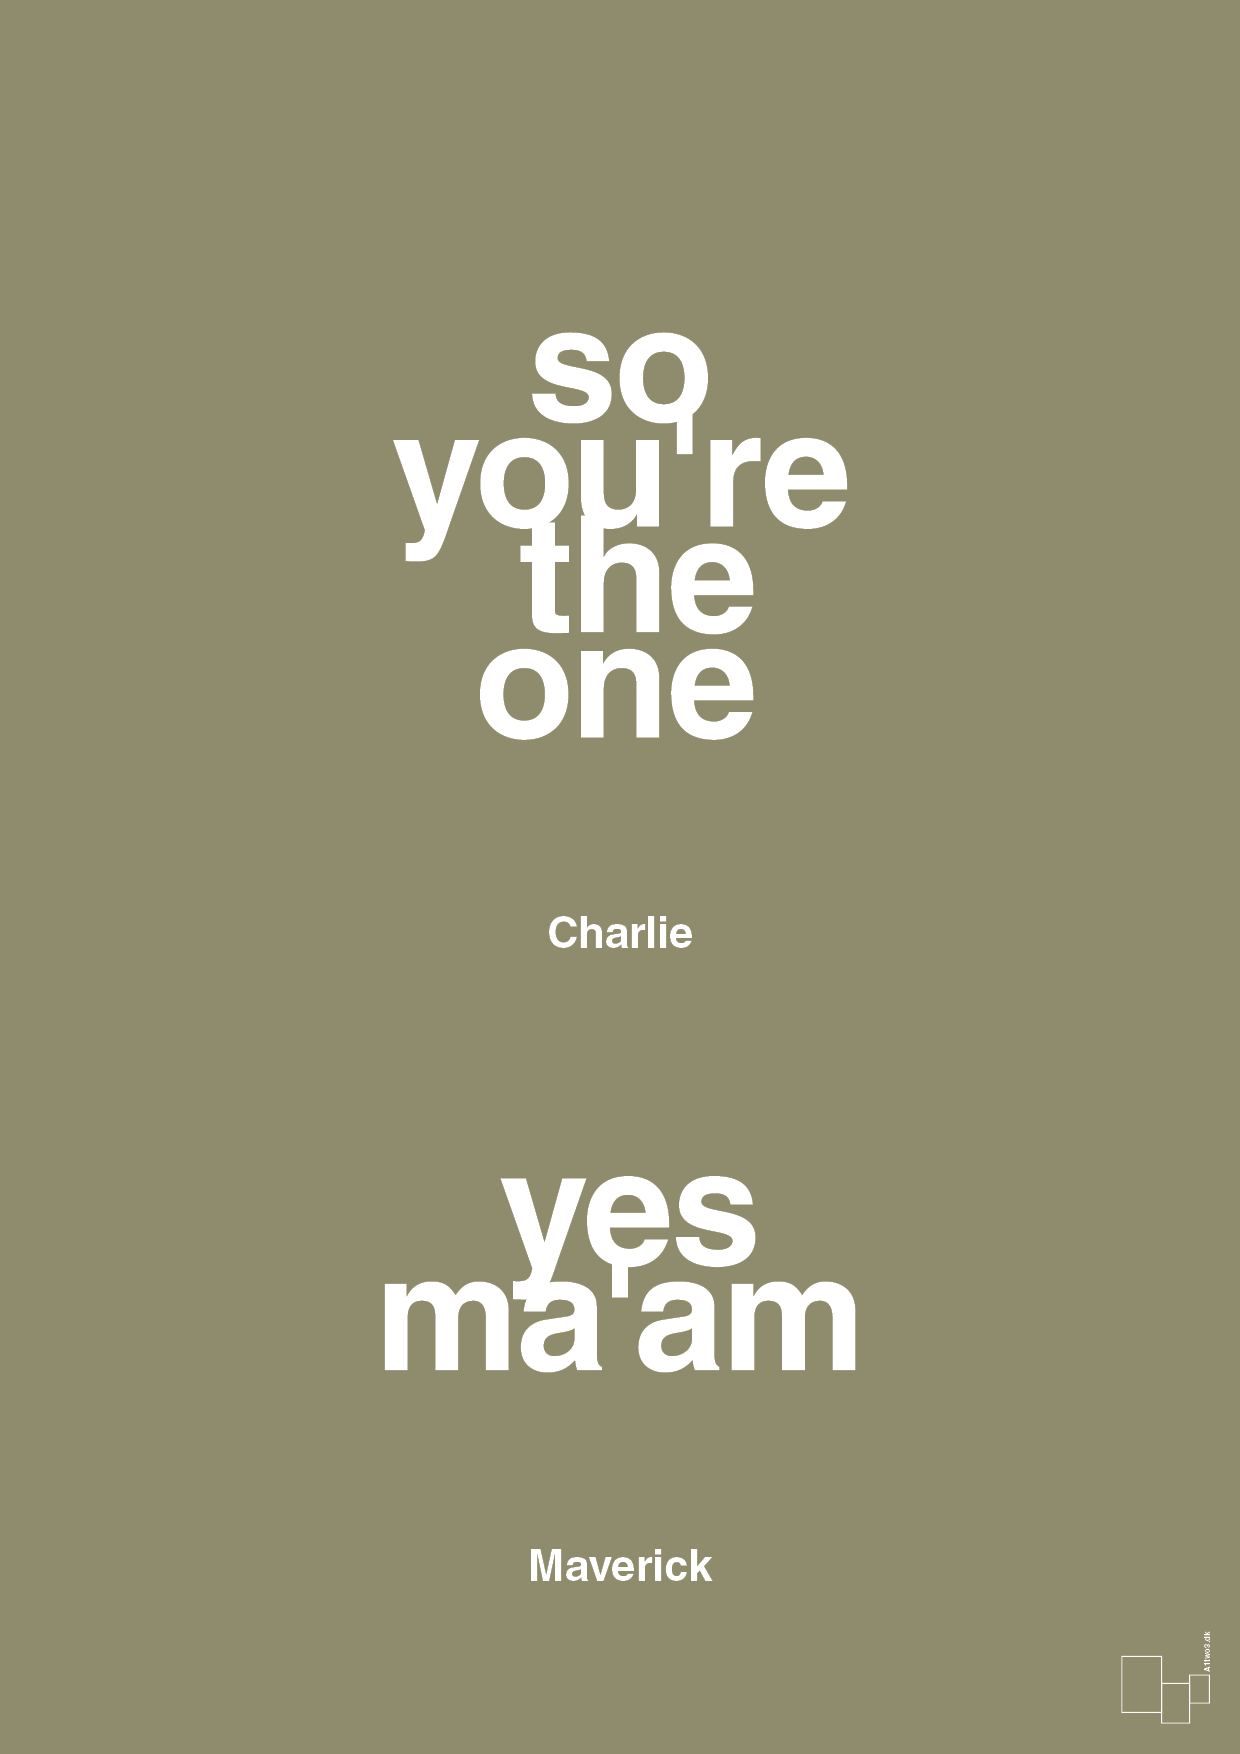 so you're the one - yes ma'am - Plakat med Citater i Misty Forrest